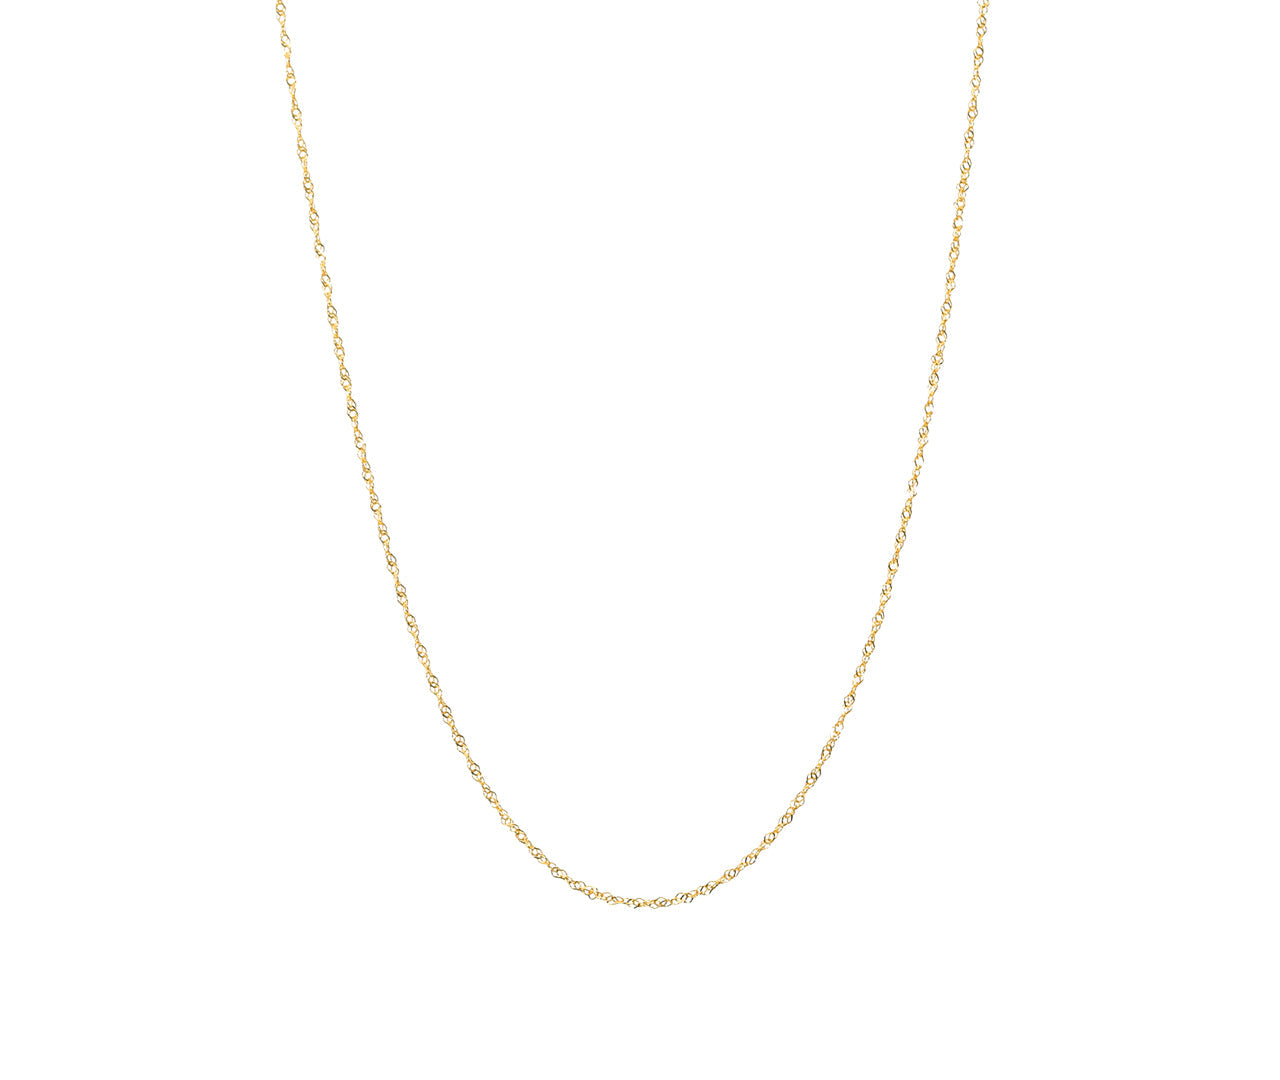 Load image into Gallery viewer, Twist 24k Gold Chain 18 Inches
